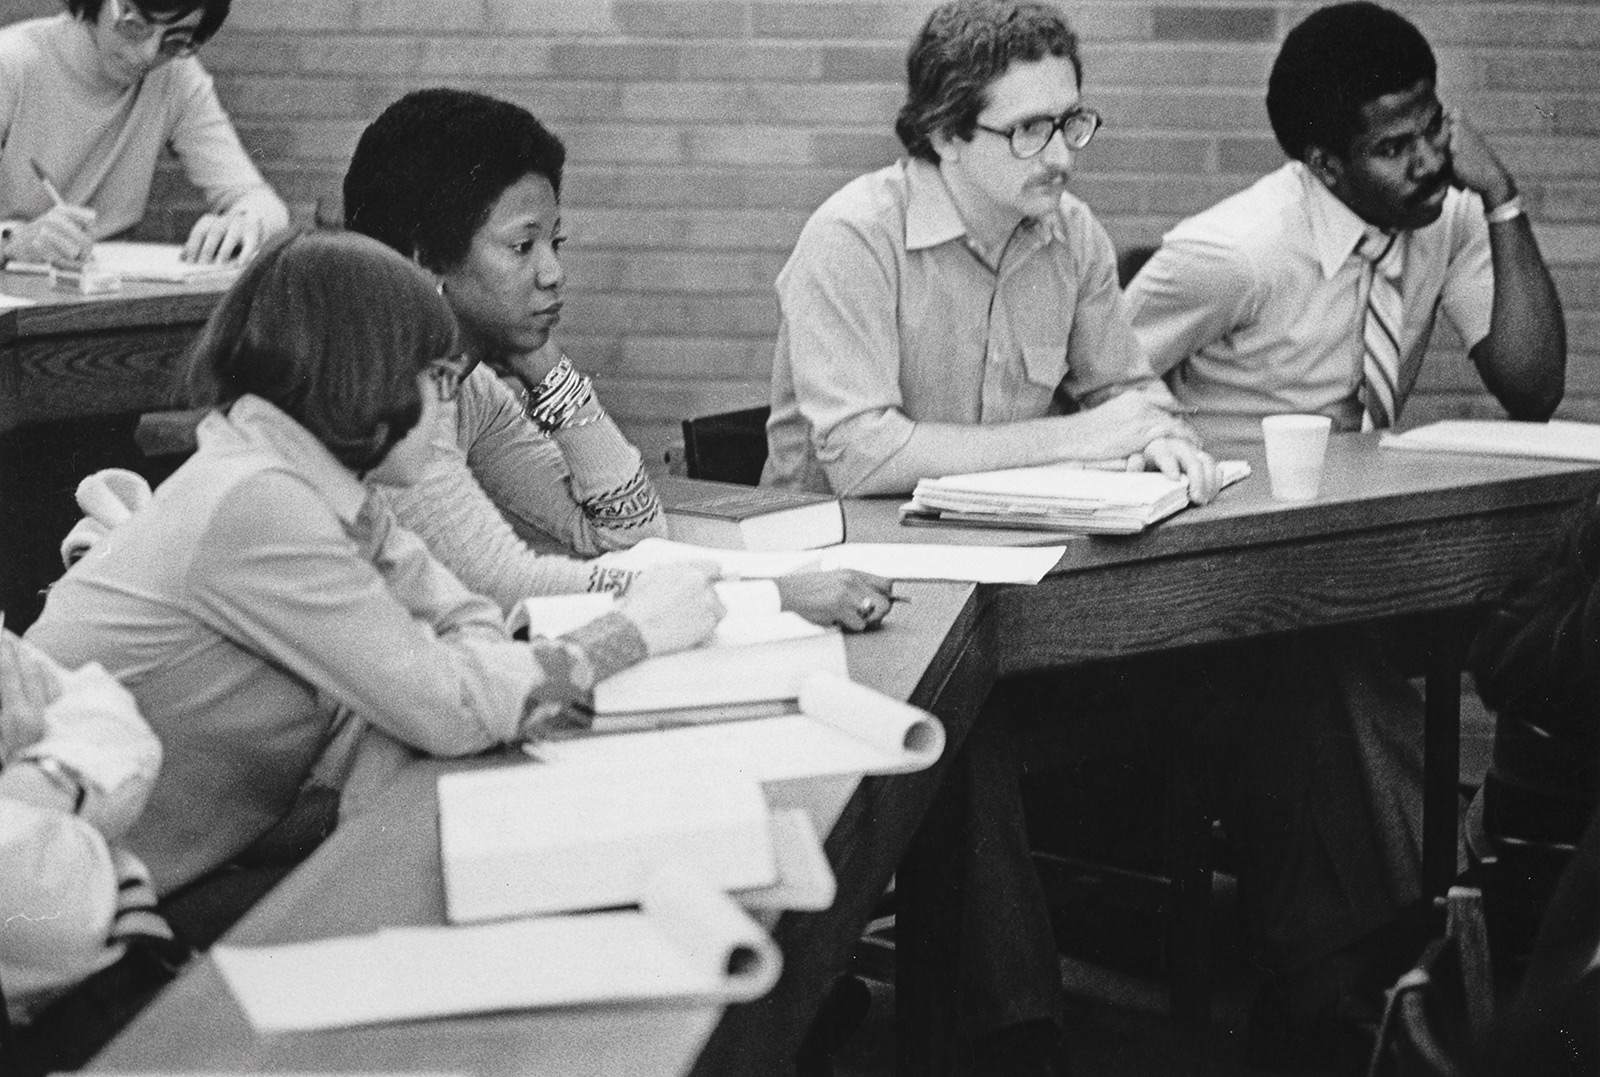 Five college students sitting in a classroom at desks.